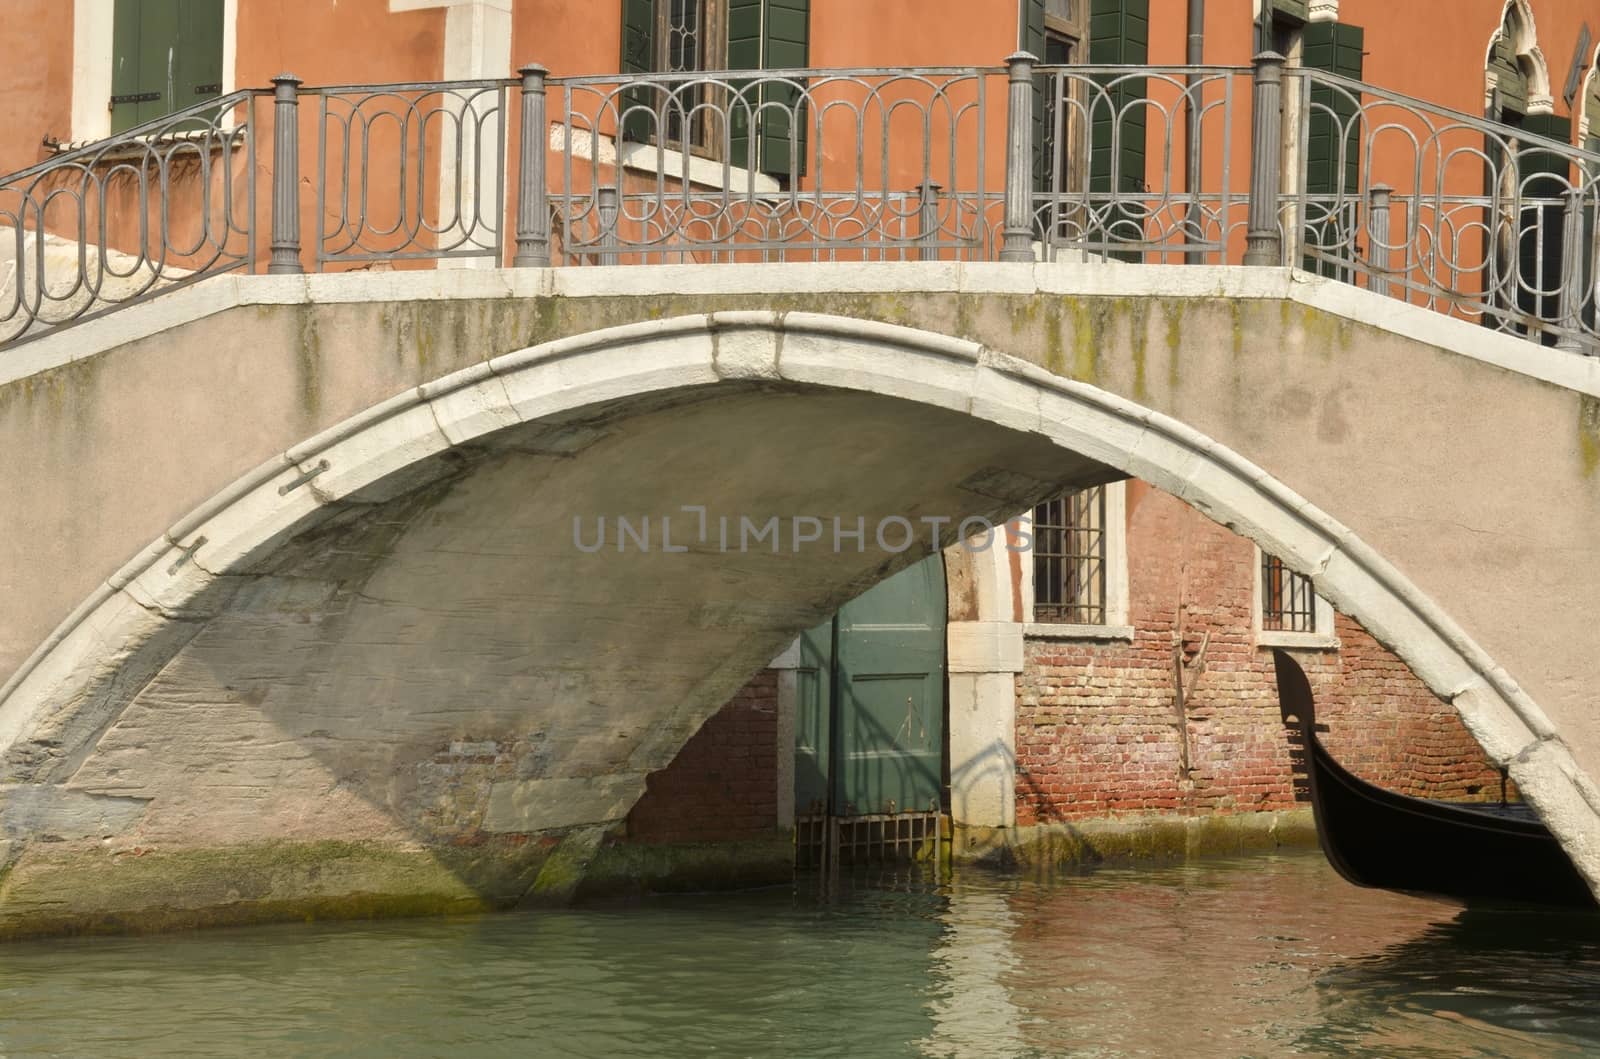 Gondola passing under a bridge in a canal in Venice, Italy.